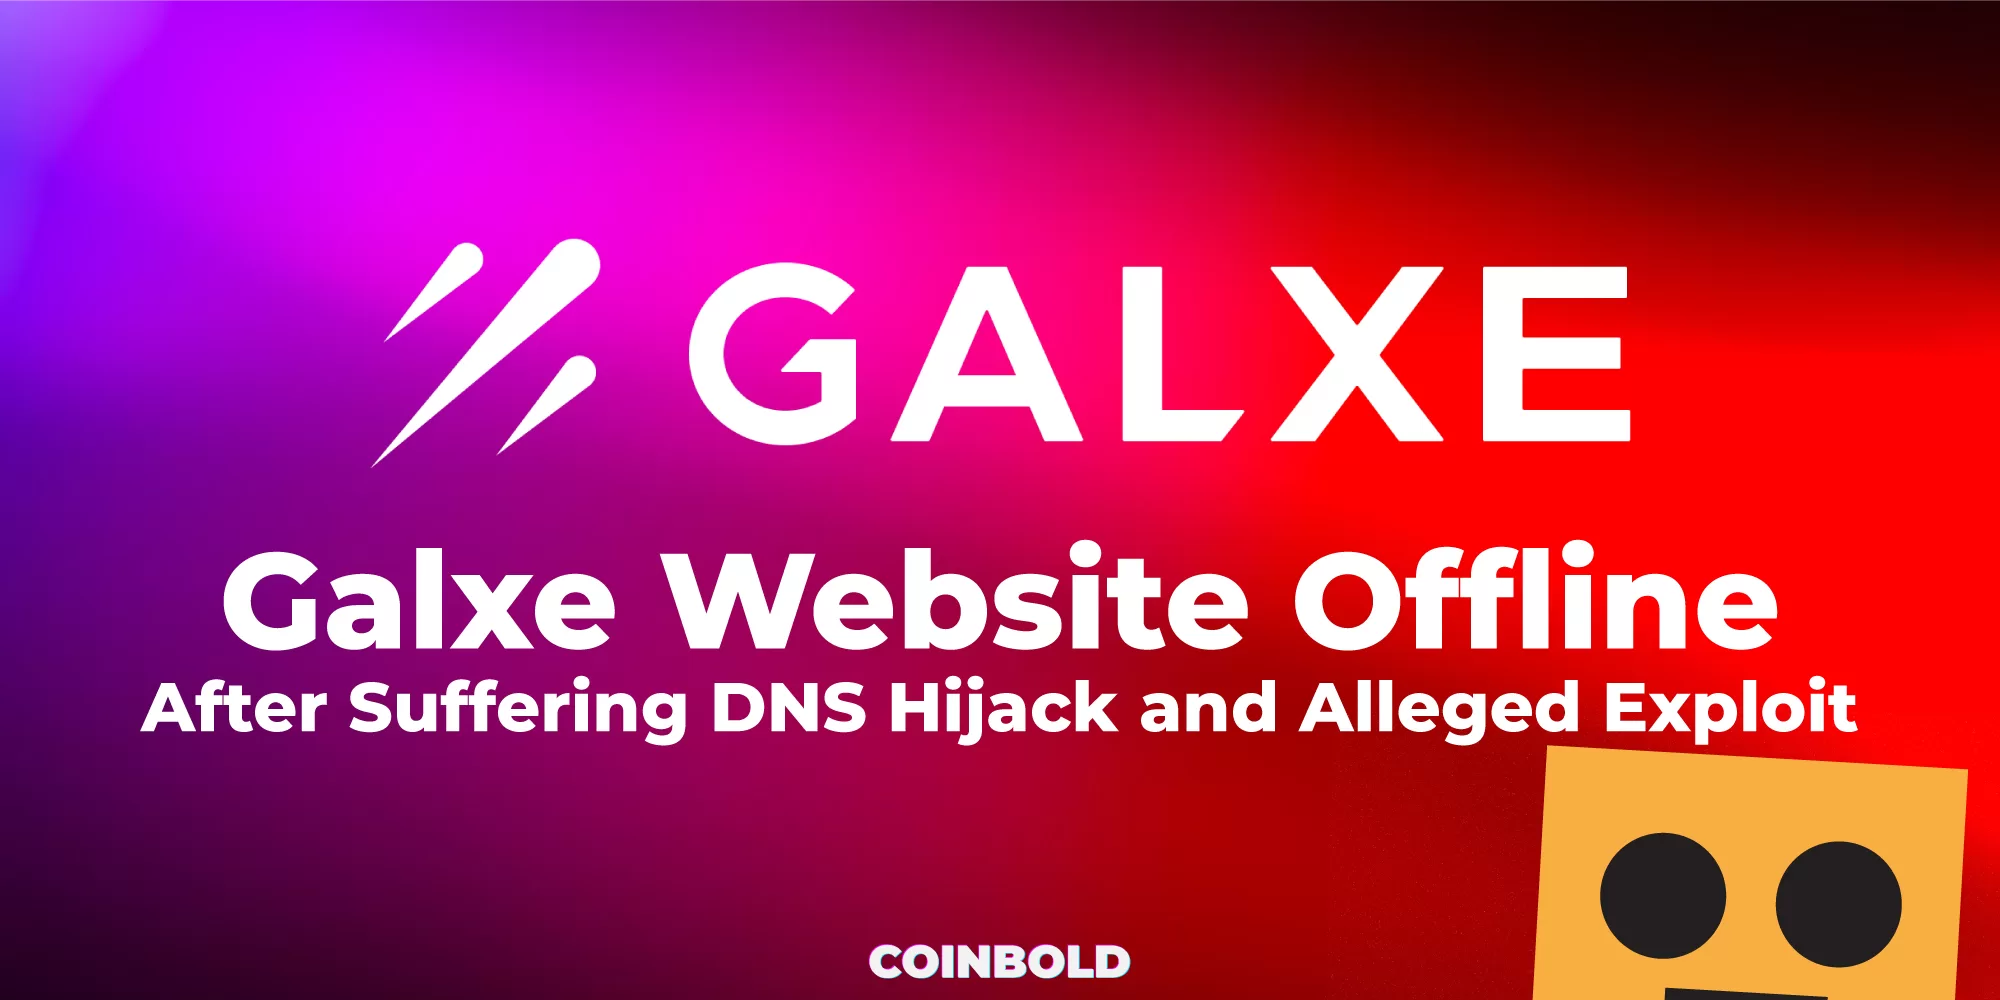 Galxe Website Offline After Suffering DNS Hijack and Alleged Exploit